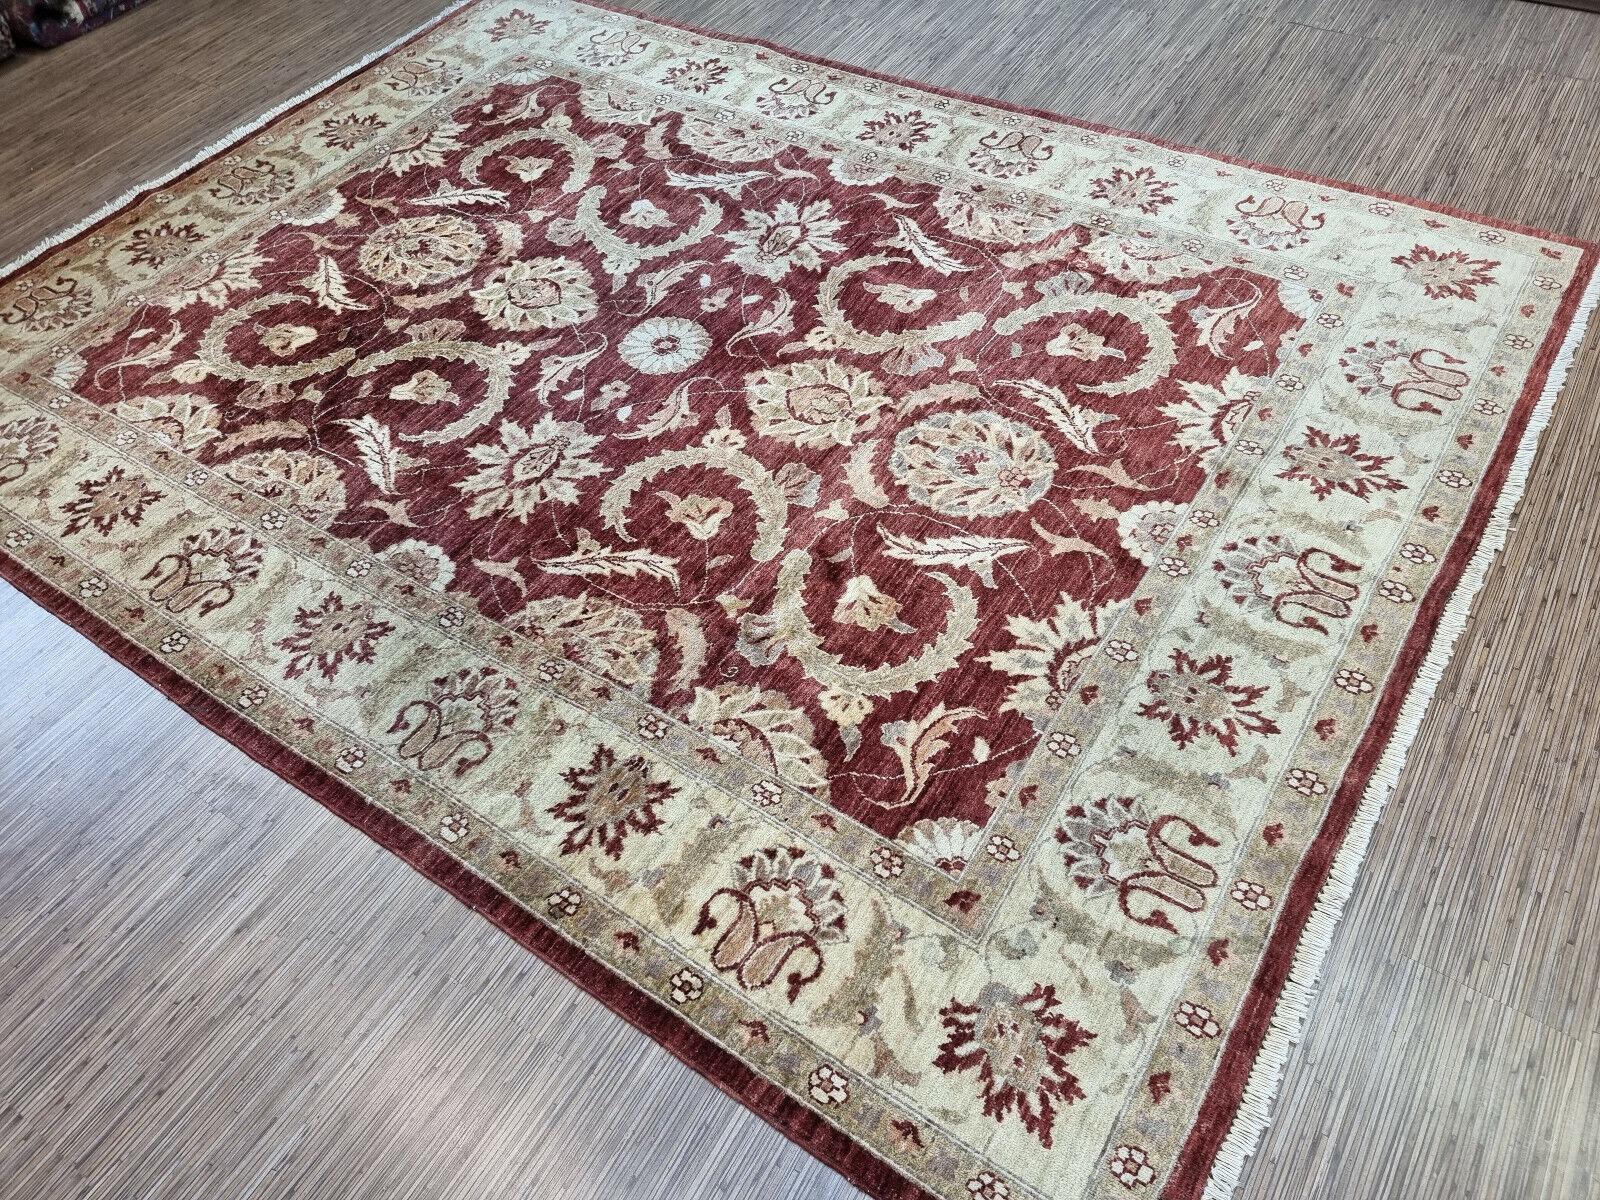 Handmade Vintage Afghan Zigler Rug

Bring home a piece of history and artistry with this handmade vintage Afghan Zigler rug. This stunning piece measures 6.7’ x 9’ and was crafted in the 1980s, but is still in good condition and ready to beautify